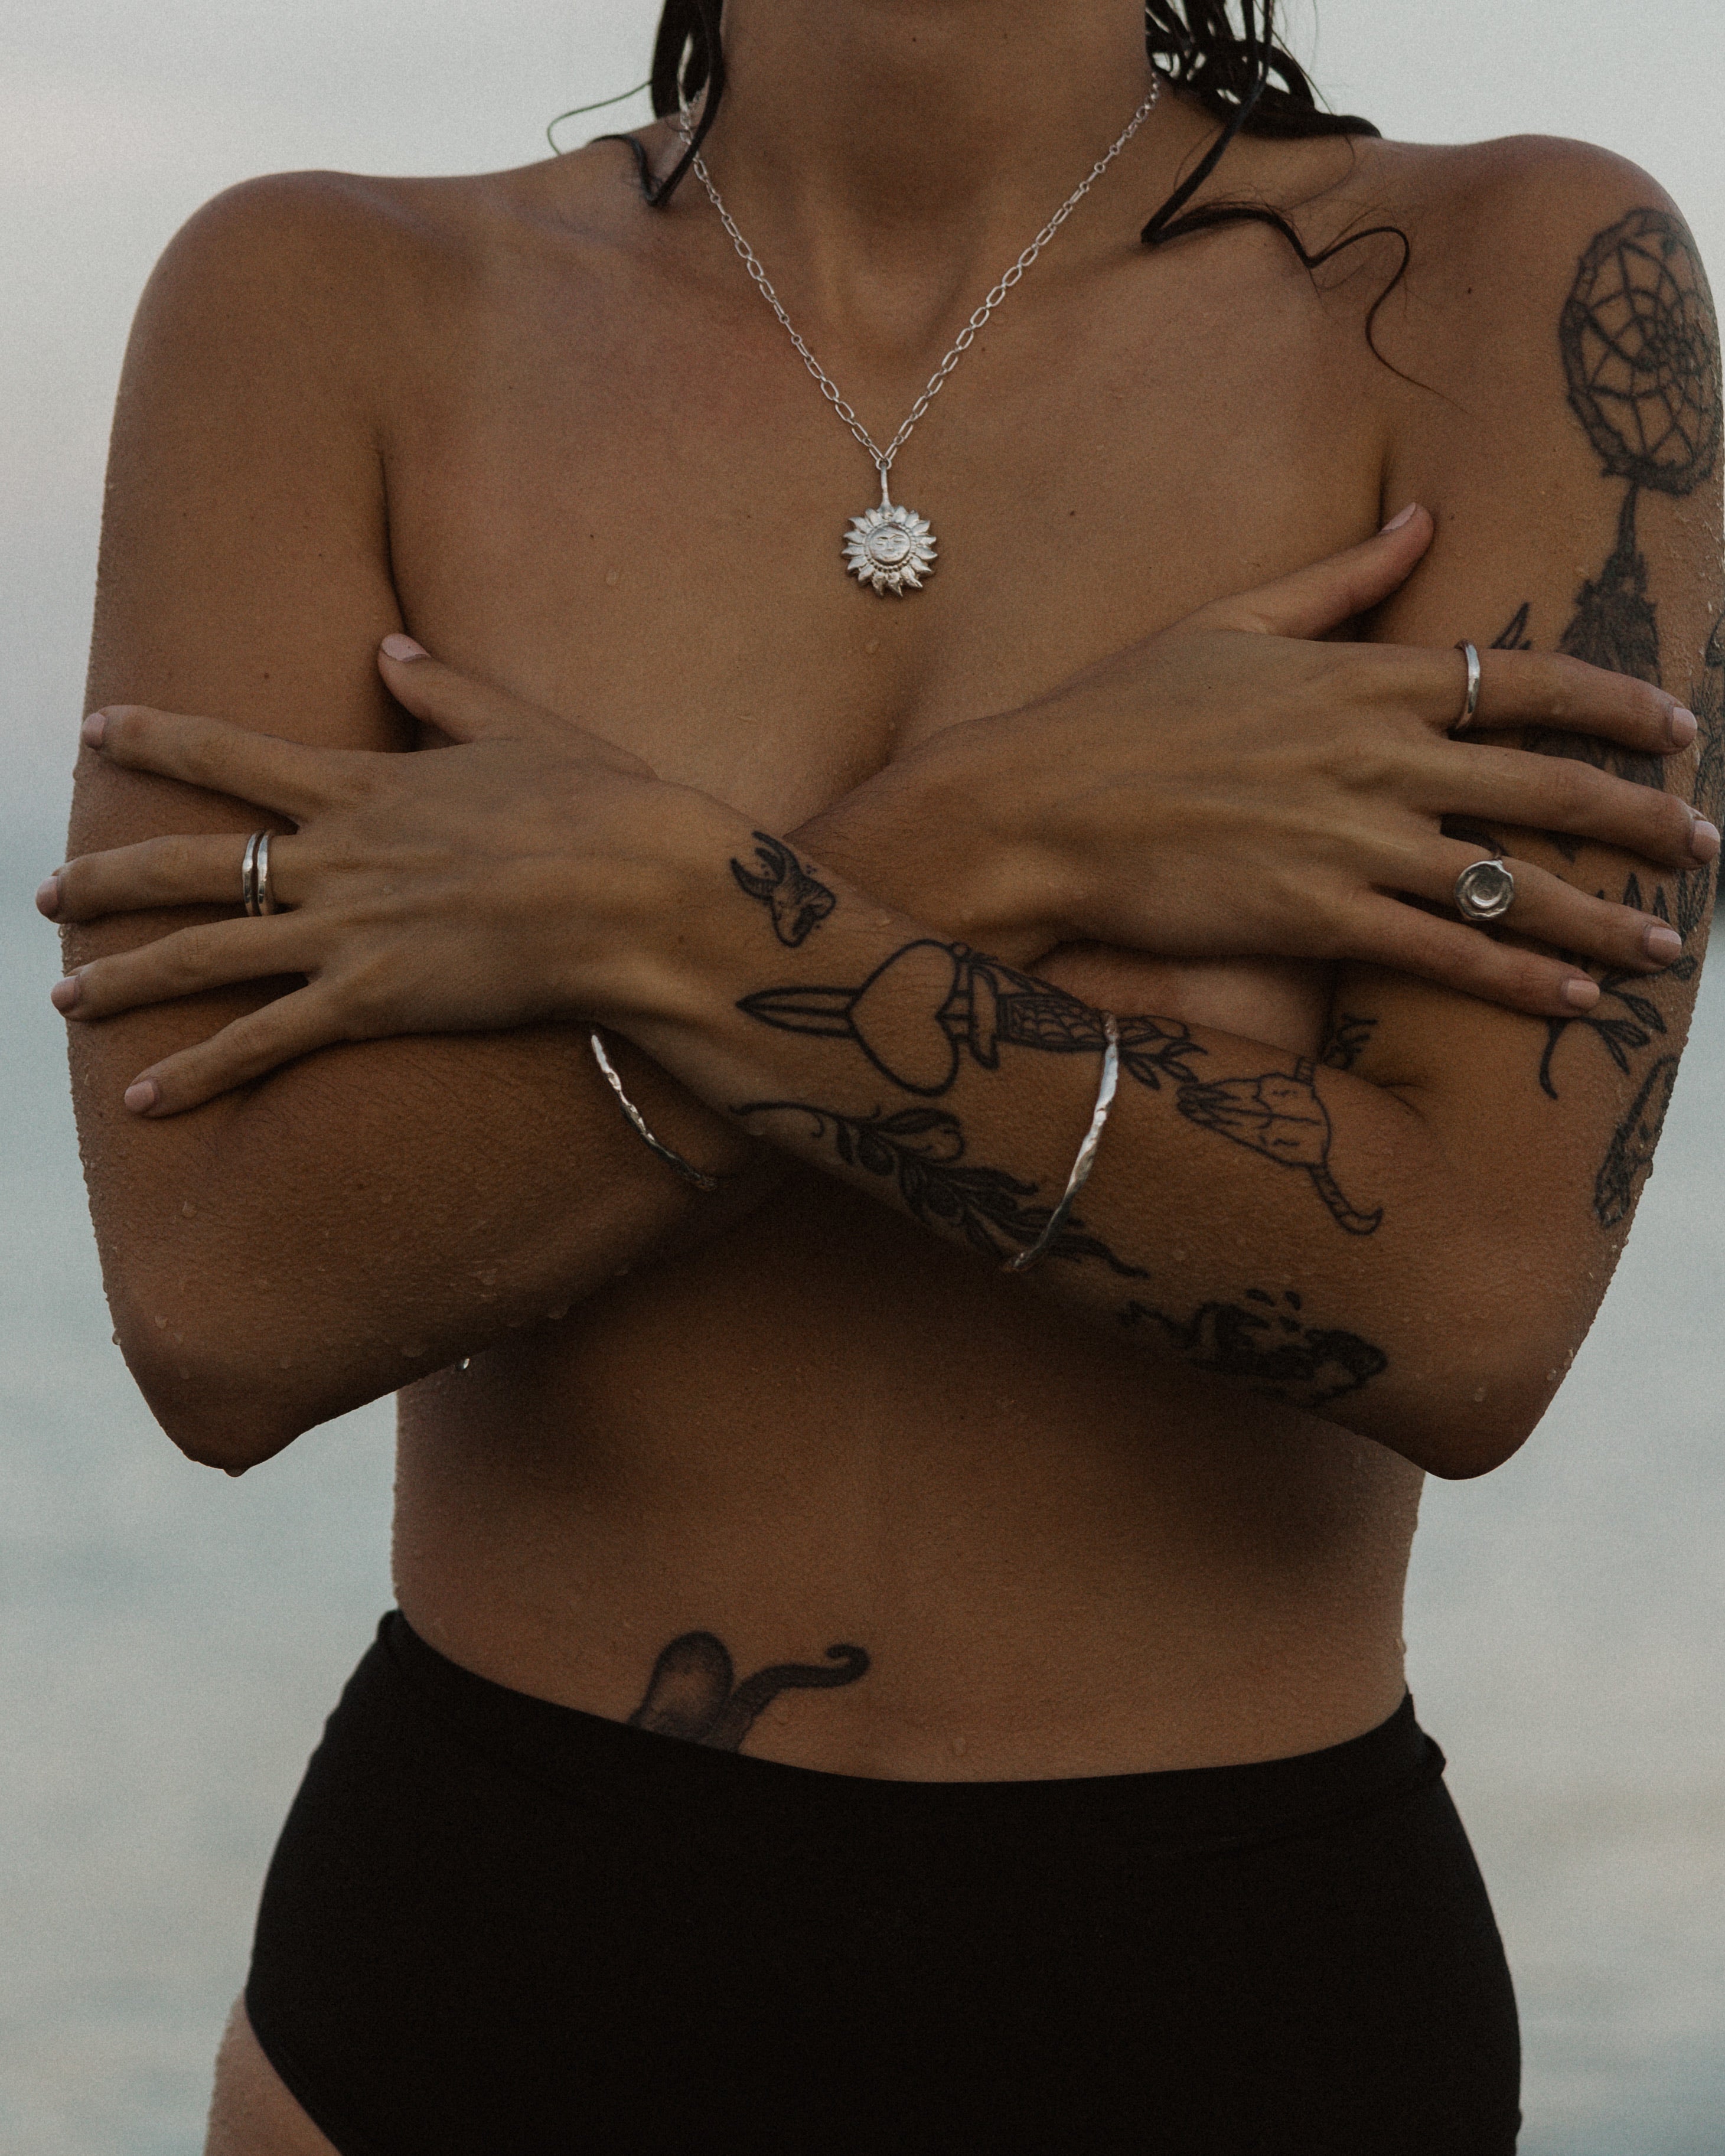 a cropped photo of a woman on the beach covering her chest, wearing stacks of silver jewelry and black bottoms